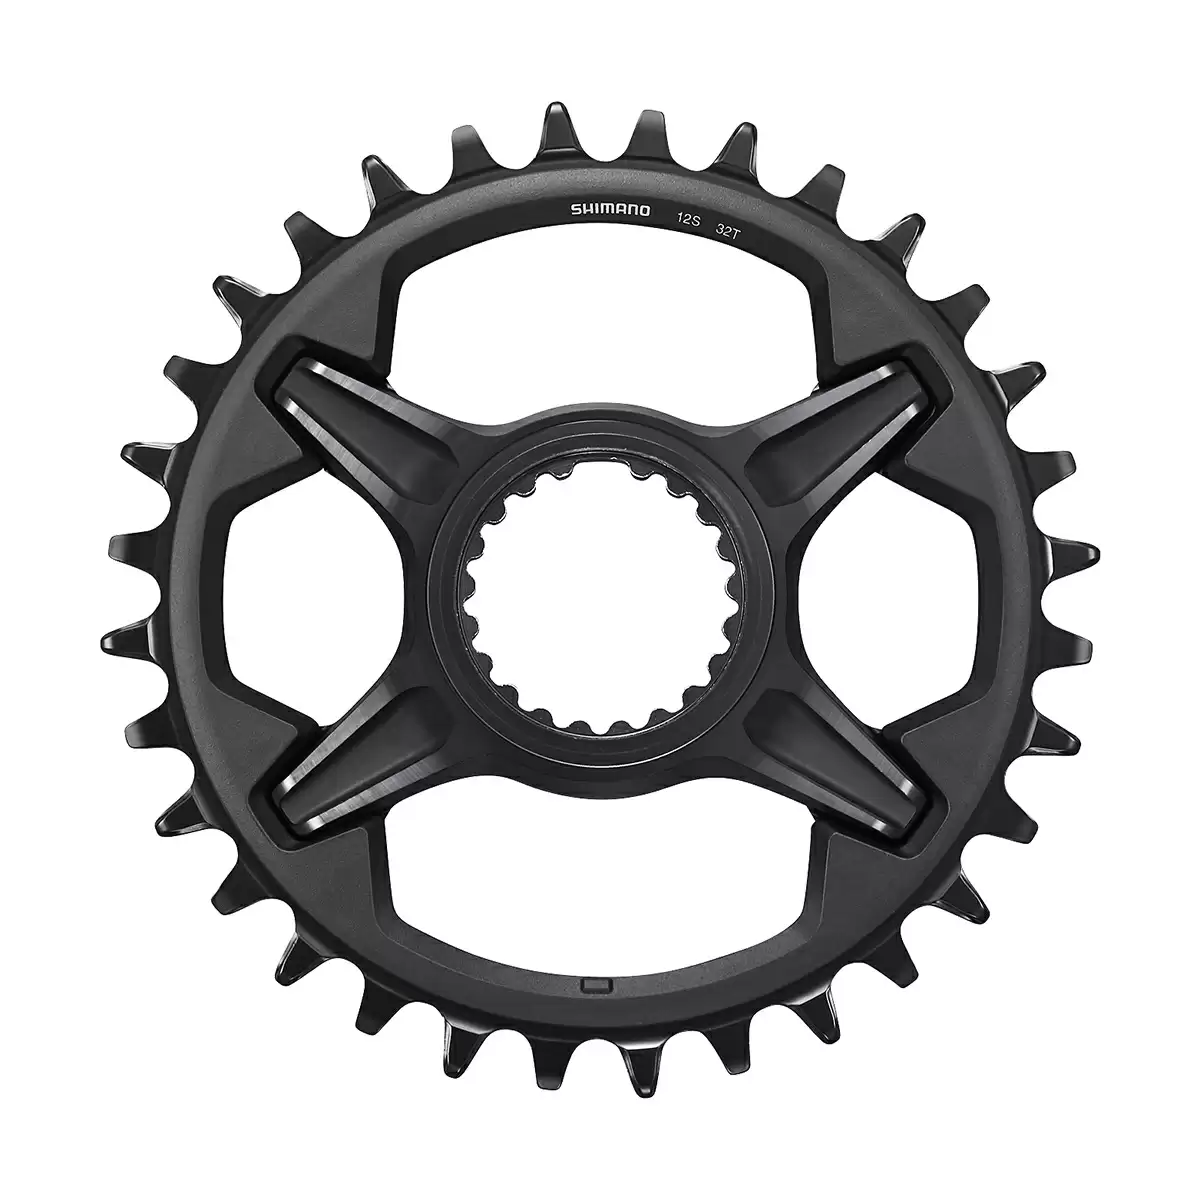 Chainring 32t SM-CRM85 for Deore XT FC-M8100-1 12 speed 2020 - image